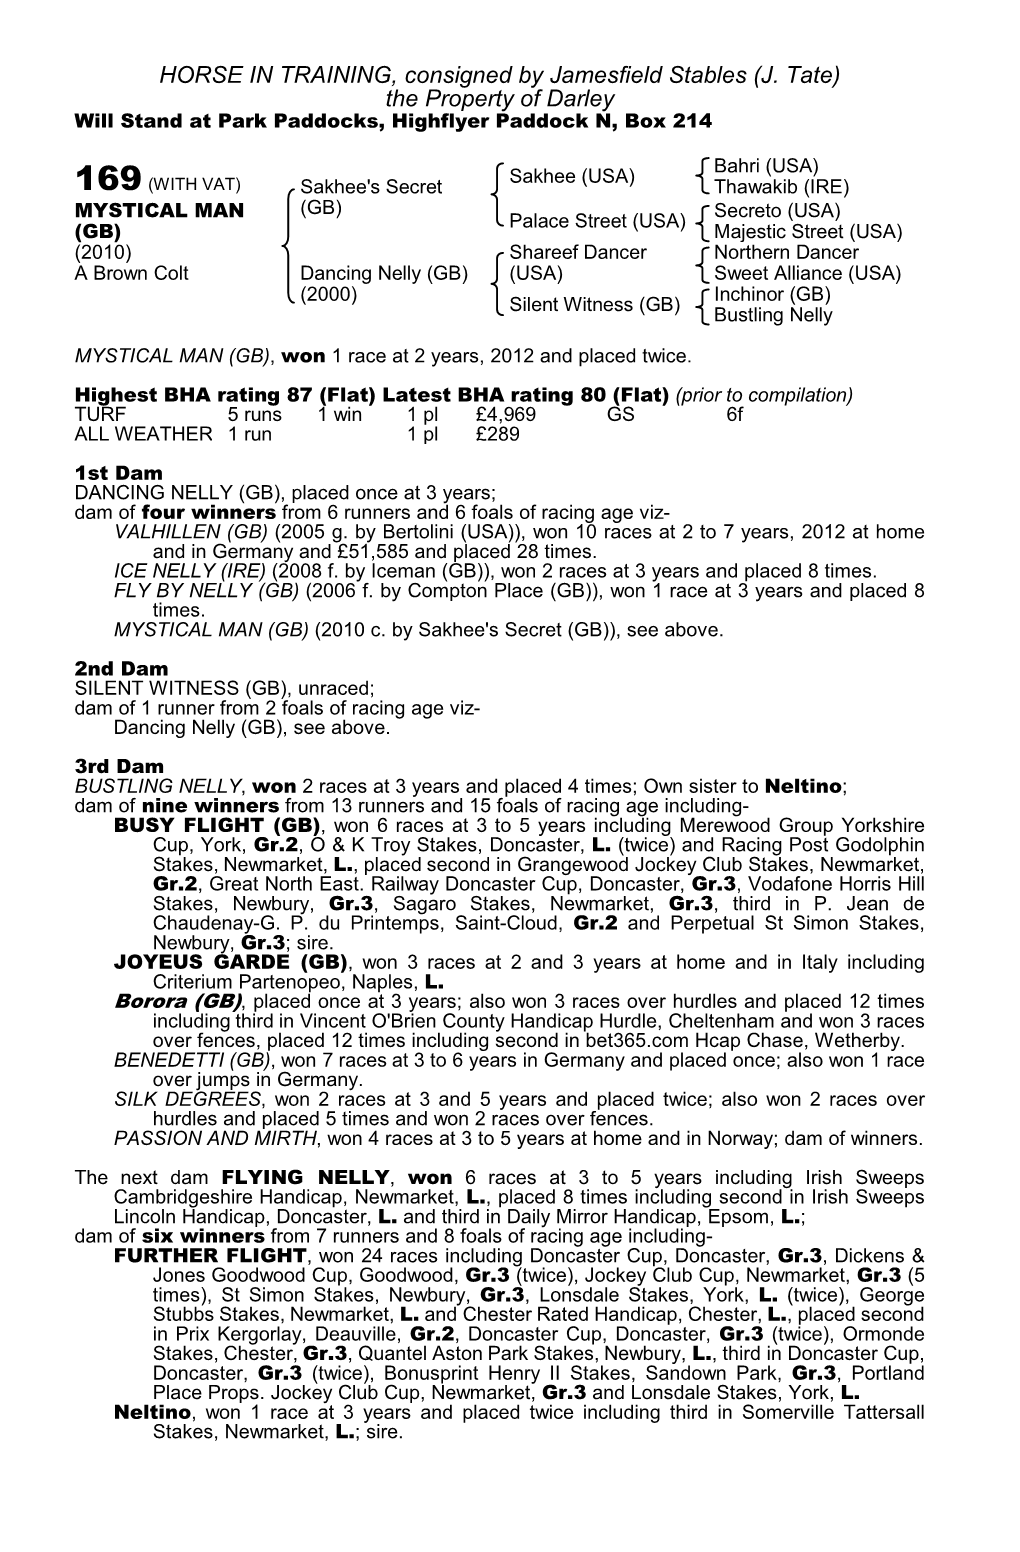 HORSE in TRAINING, Consigned by Jamesfield Stables (J. Tate) the Property of Darley Will Stand at Park Paddocks, Highflyer Paddock N, Box 214